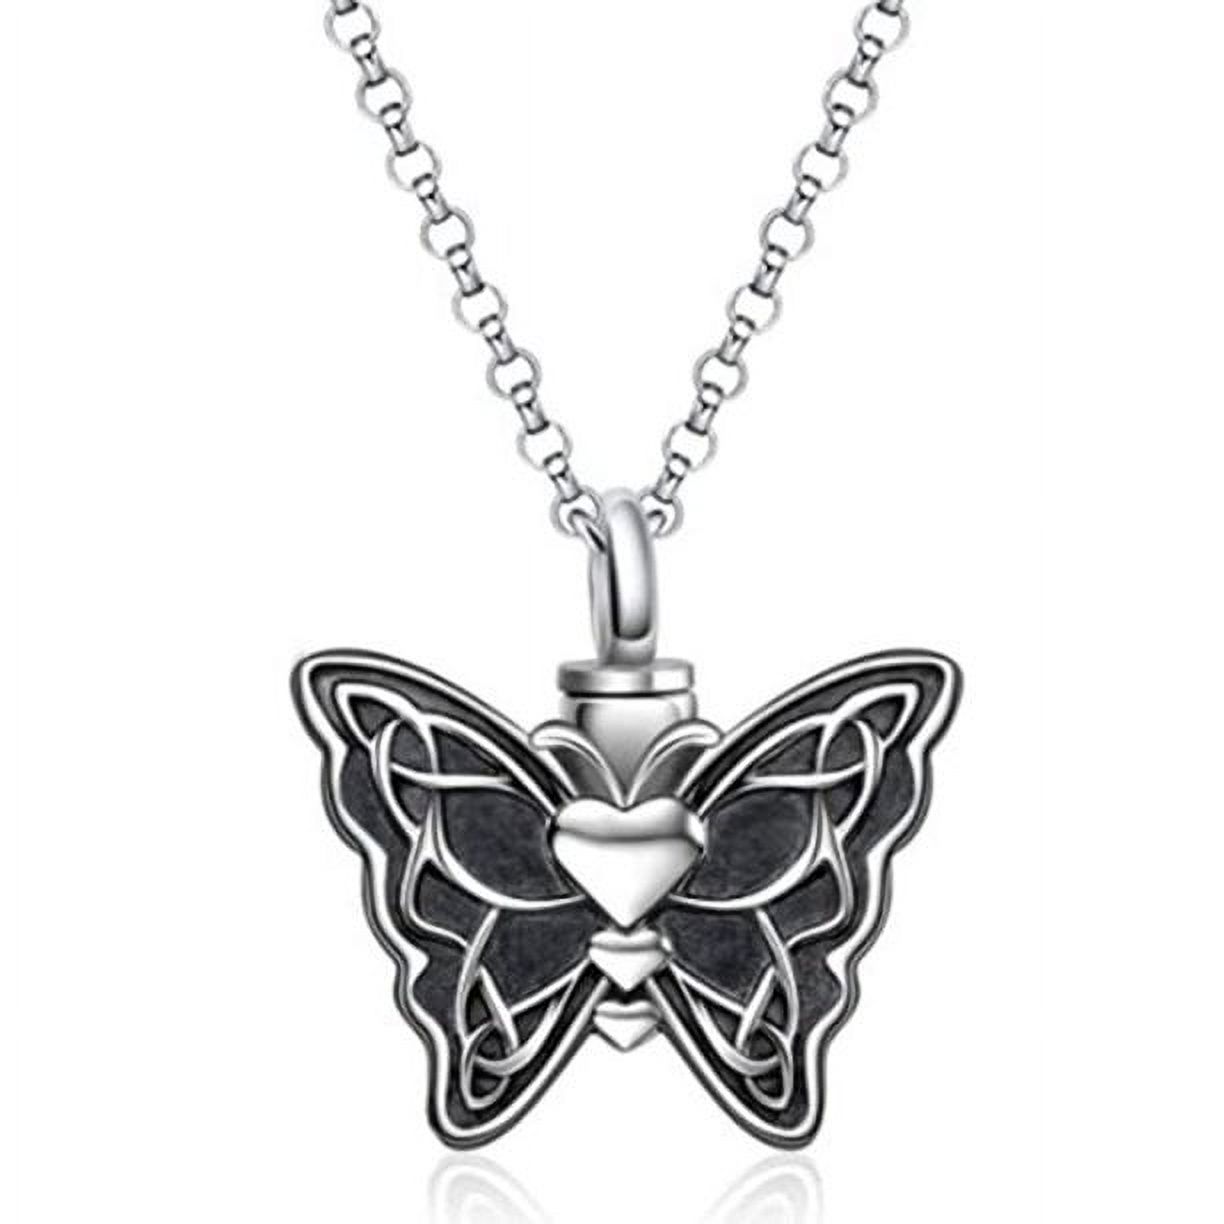 SHIYAO Necklace for Women, Cremation Jewelry for Ashes for Human, Memorial Ash Pendant Keepsake Gifts(Butterfly) - image 1 of 4